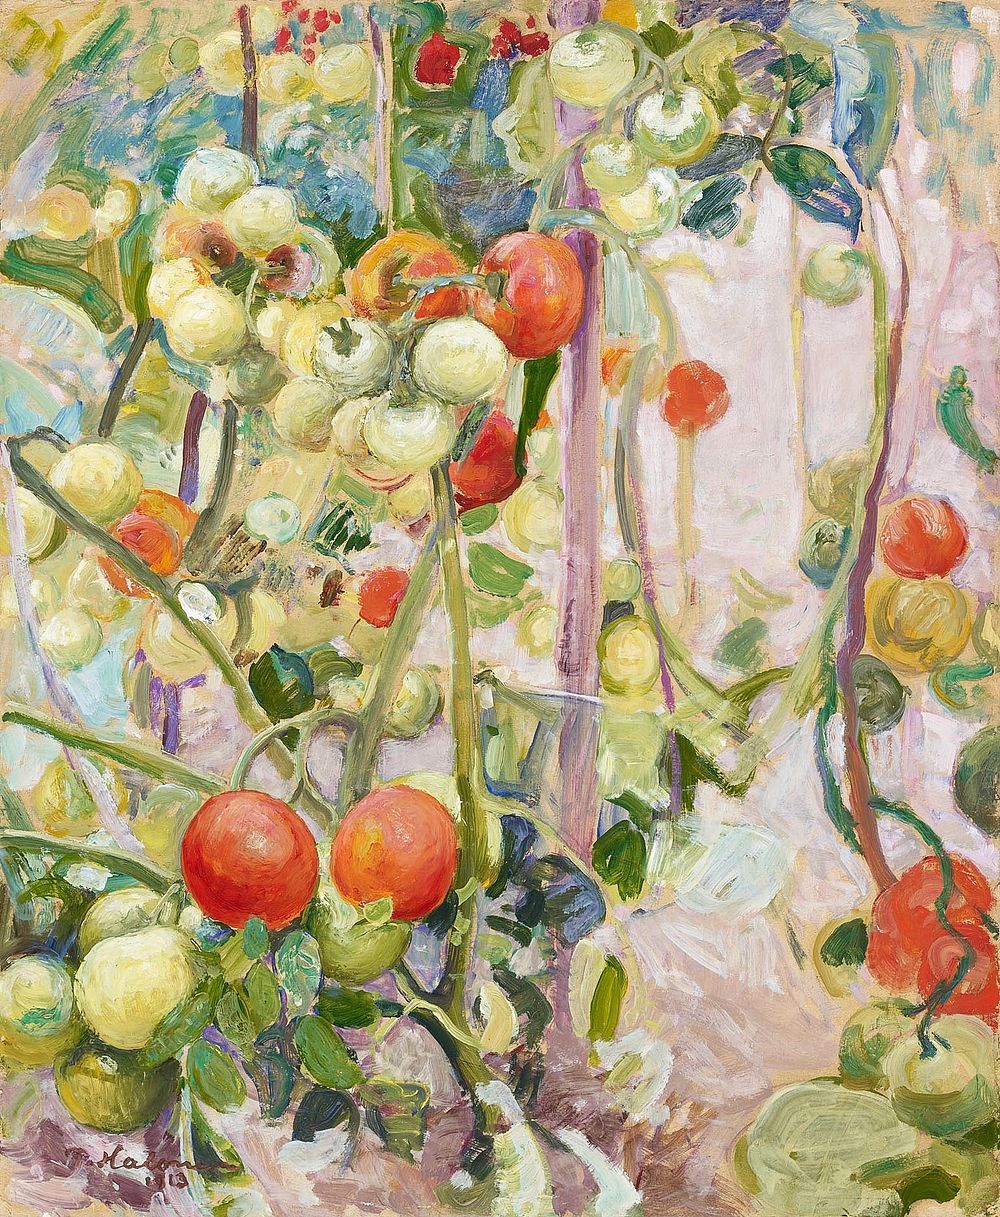 Tomatoes (1913) vintage painting by Pekka Halonen. Original public domain image from The Finnish National Gallery. Digitally…